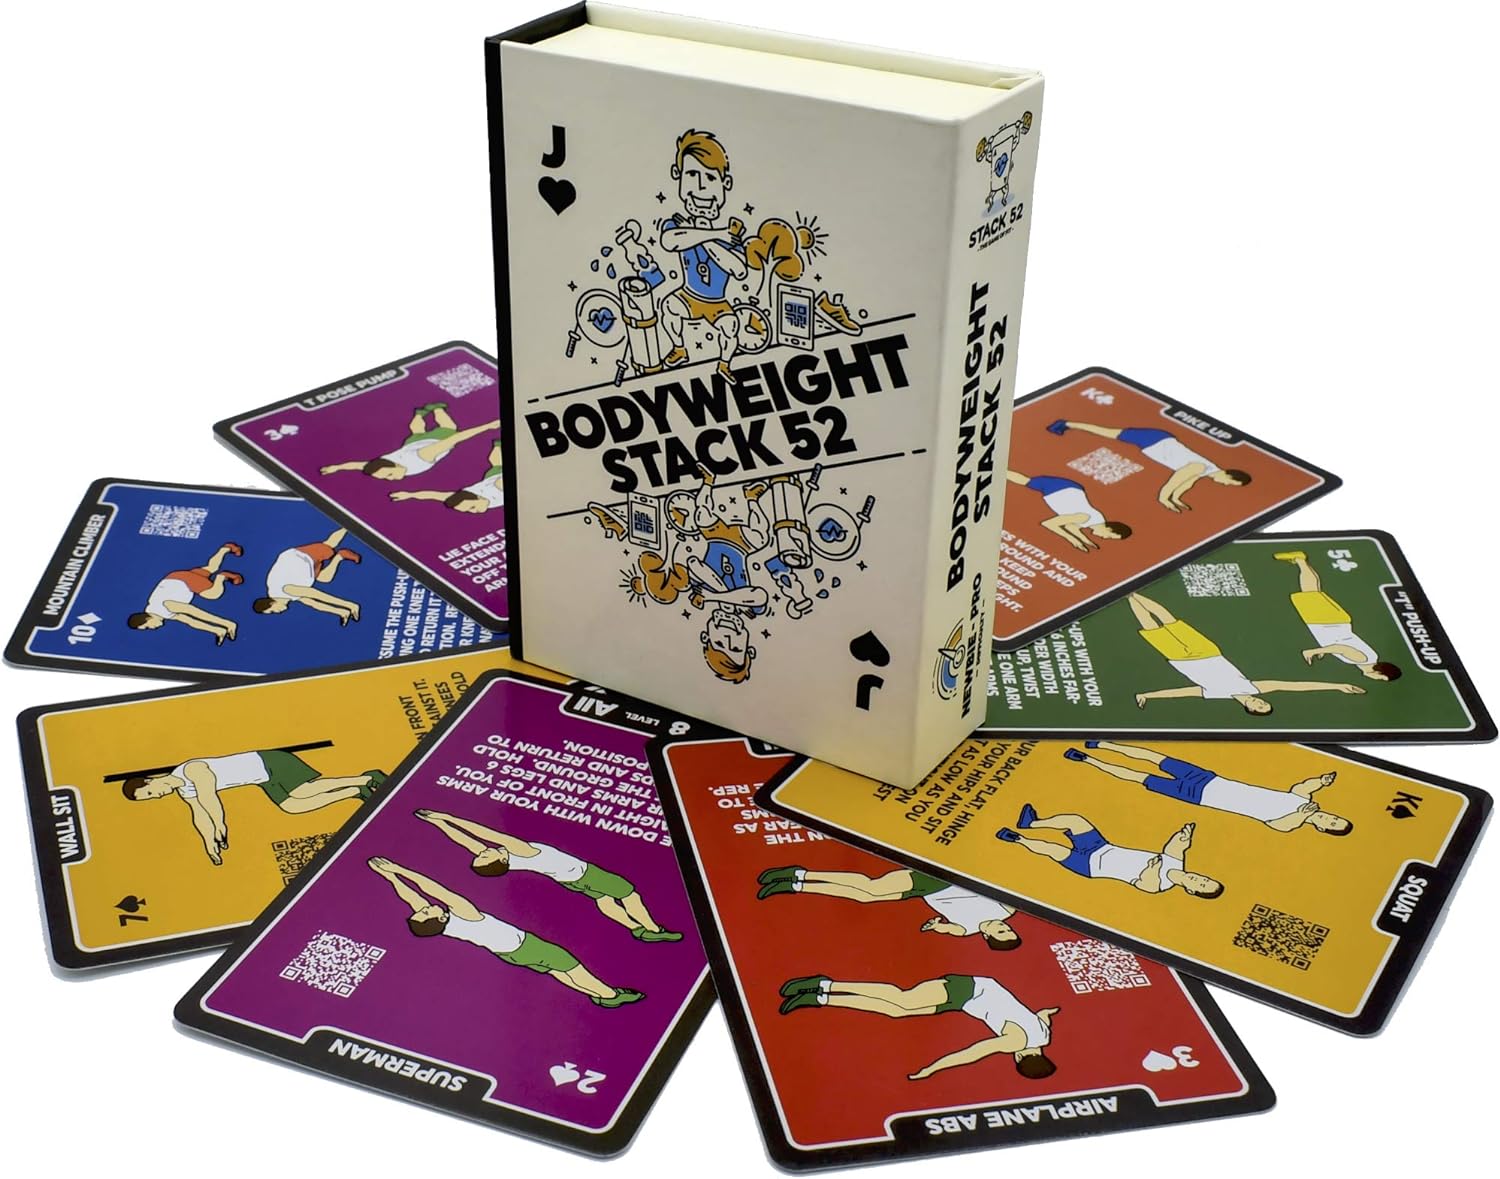 Stack 52 Bodyweight Exercise Cards: Workout Playing Card Game. Designed by a Military Fitness Expert. Video Instructions Included. No Equipment Needed. Burn Fat Build Muscle.